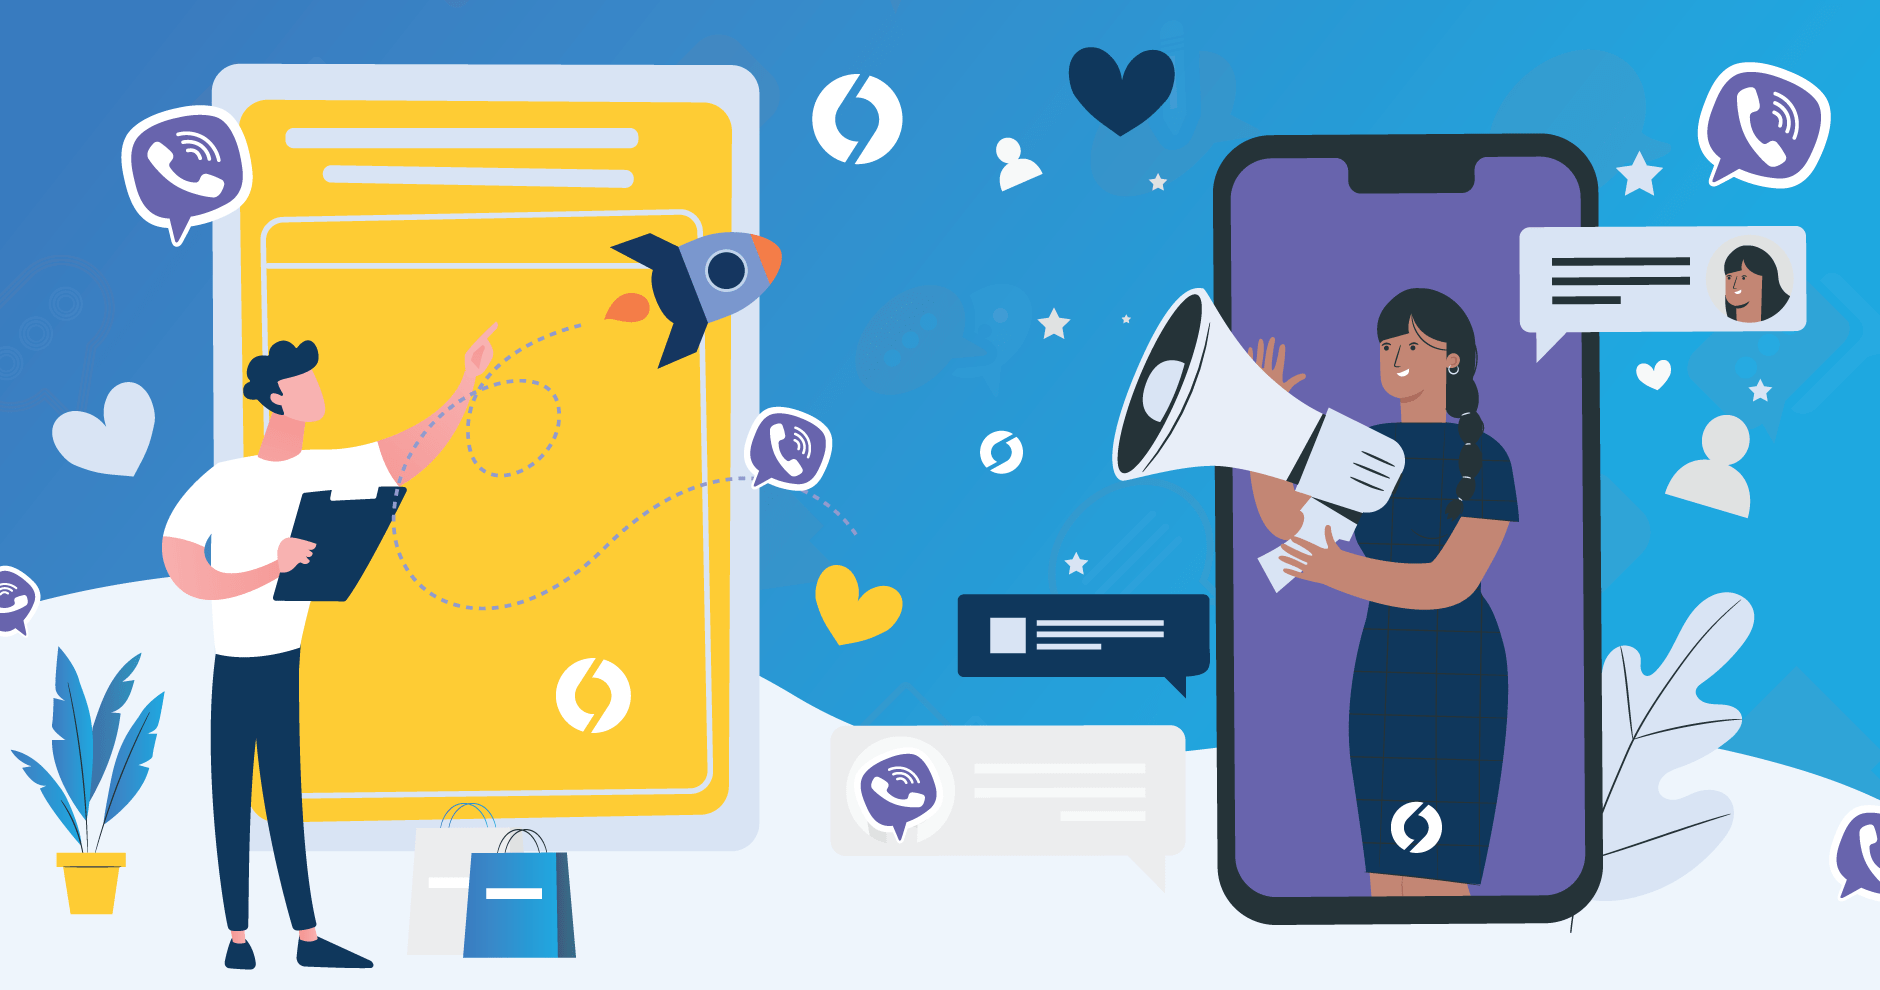 Viber Marketing: A Simple Guide to Winning Your Customer’s Hearts